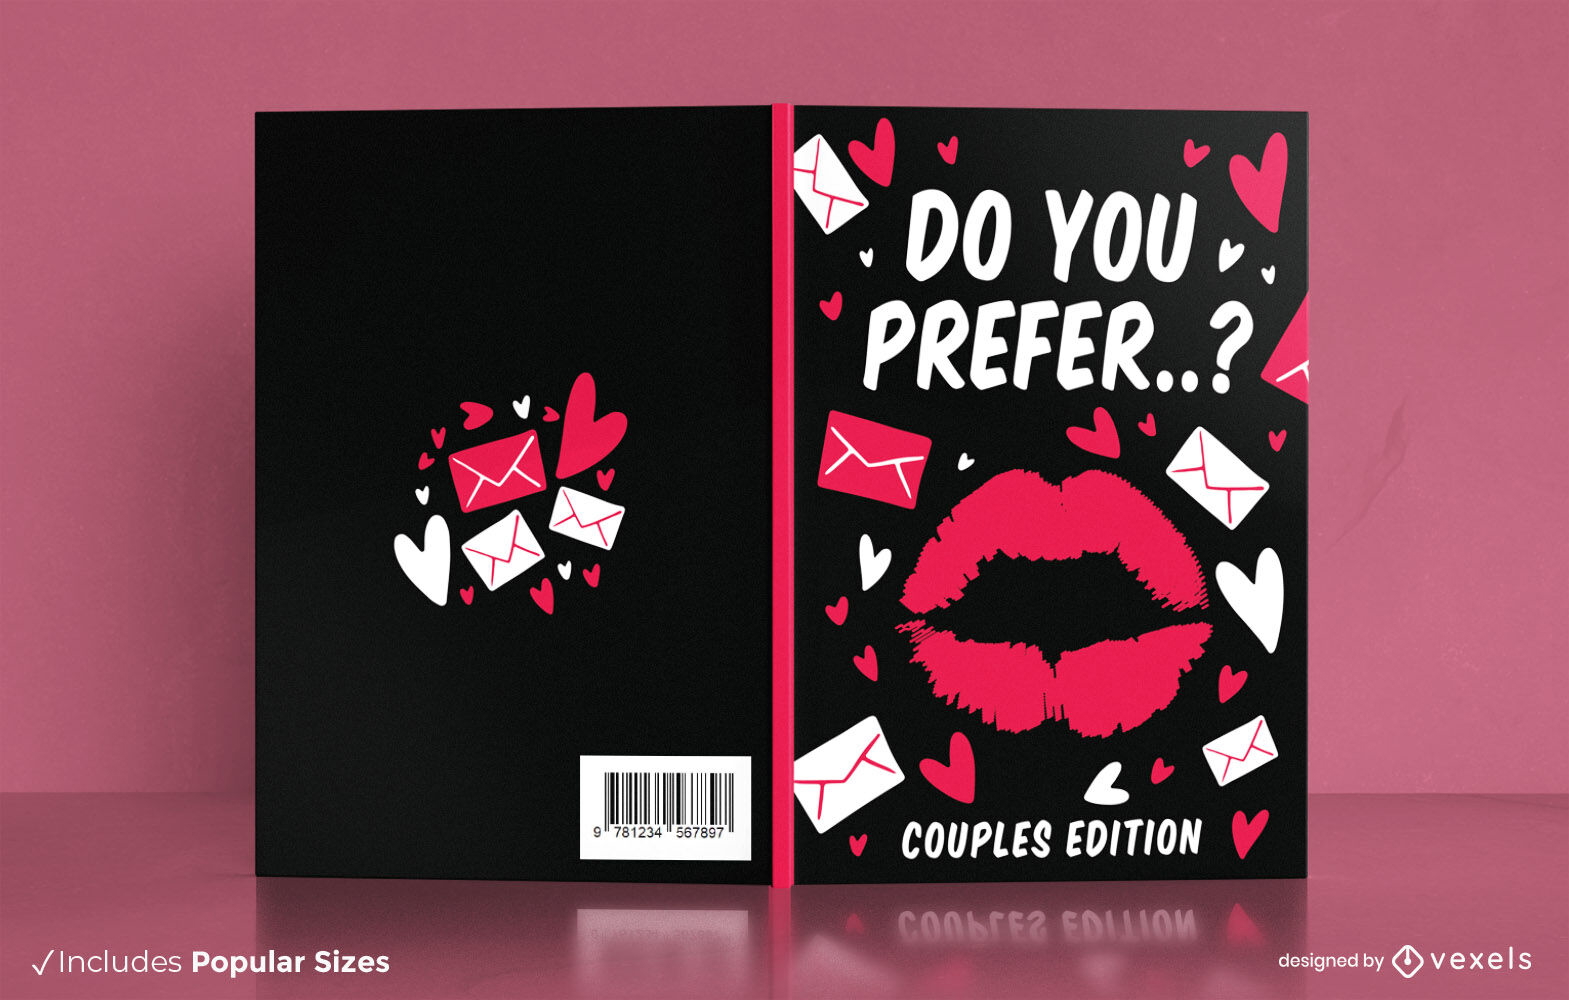 Couples game book cover design KDP